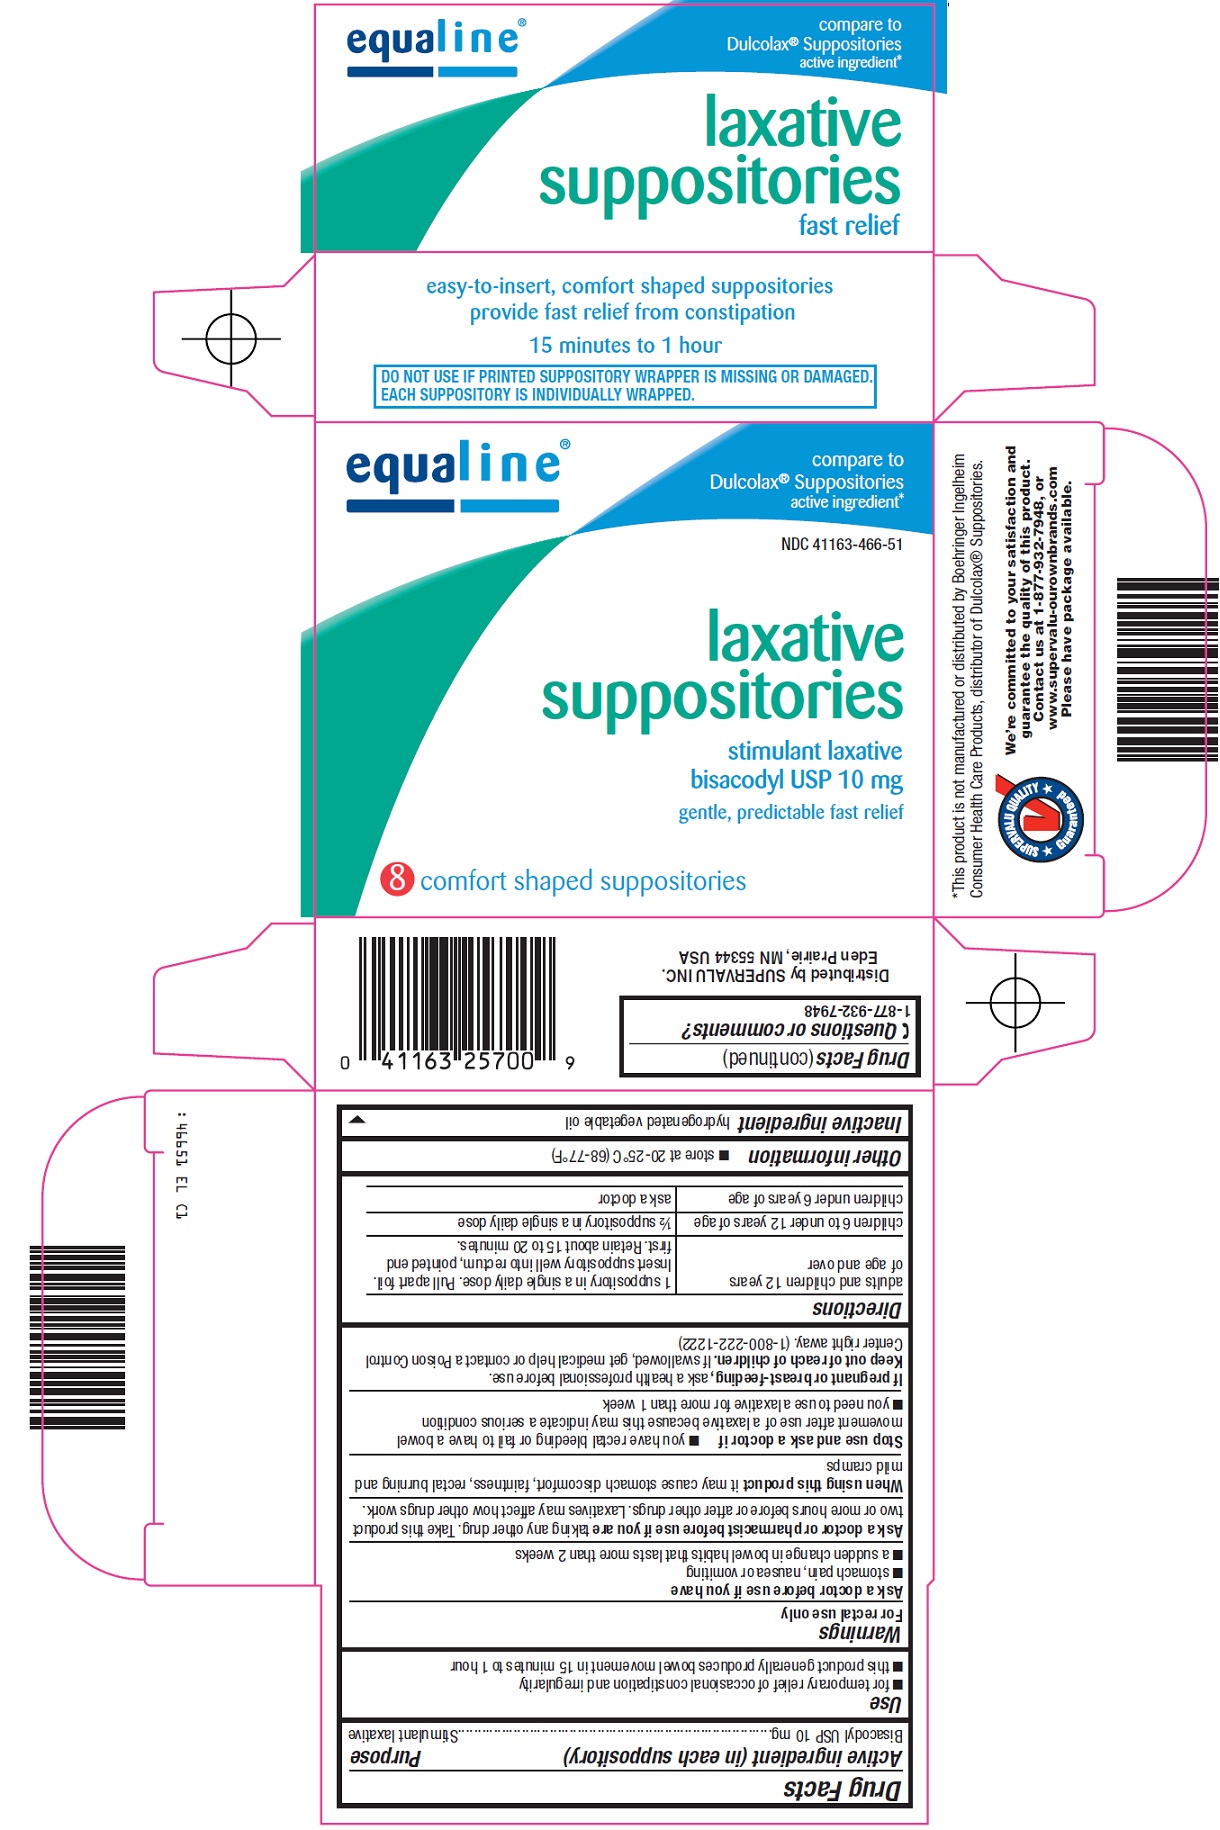 Laxative Suppositories Carton Image